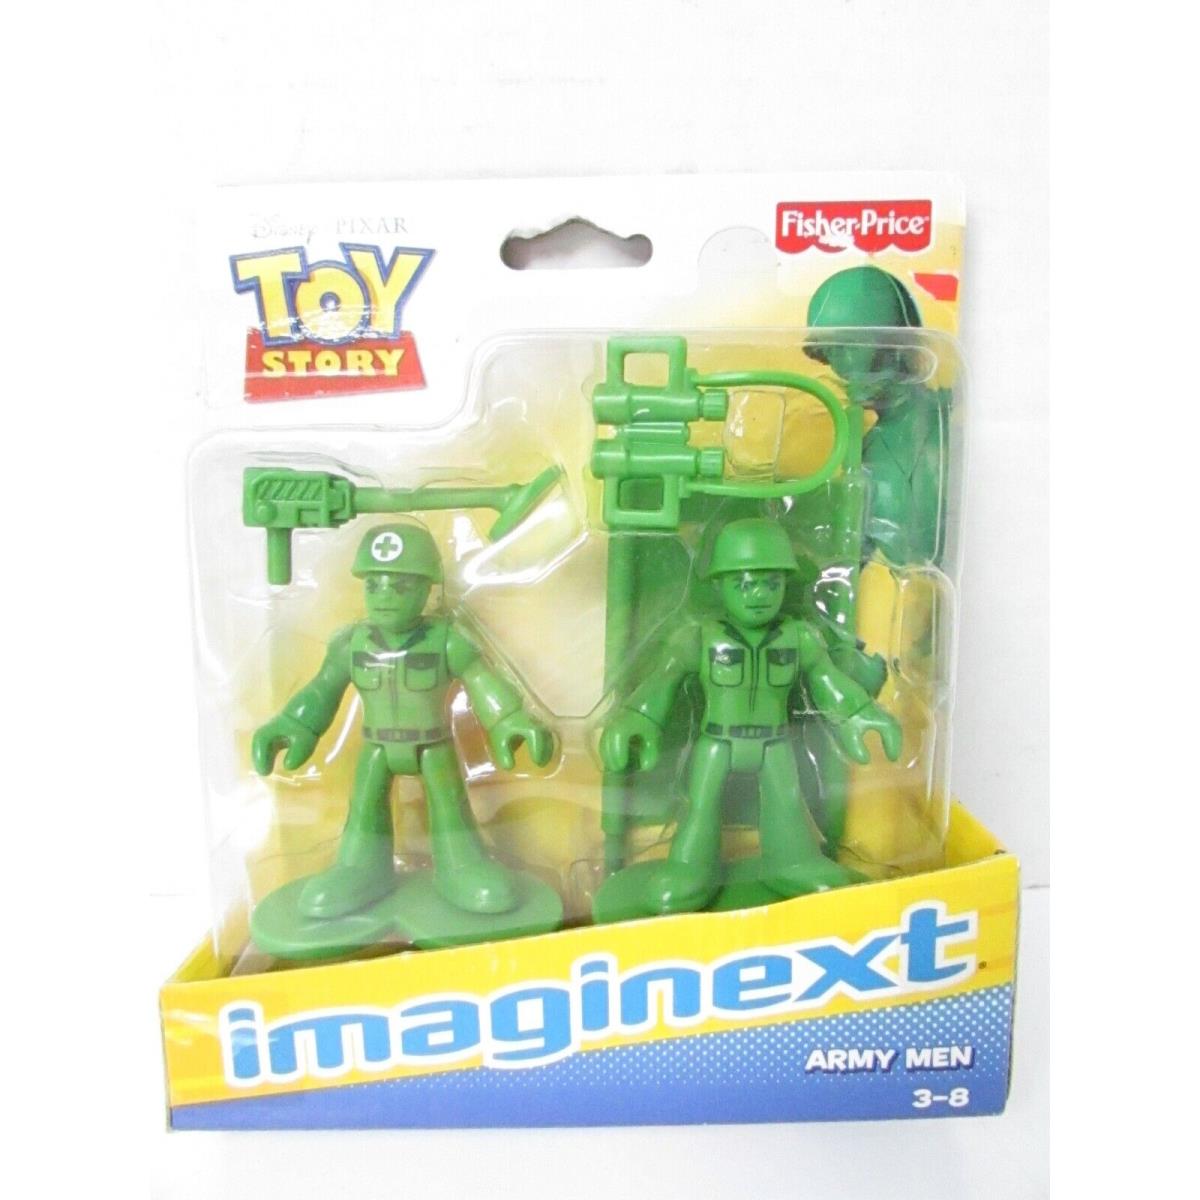 Imaginext Toy Story Army Men Figures Fisher Price